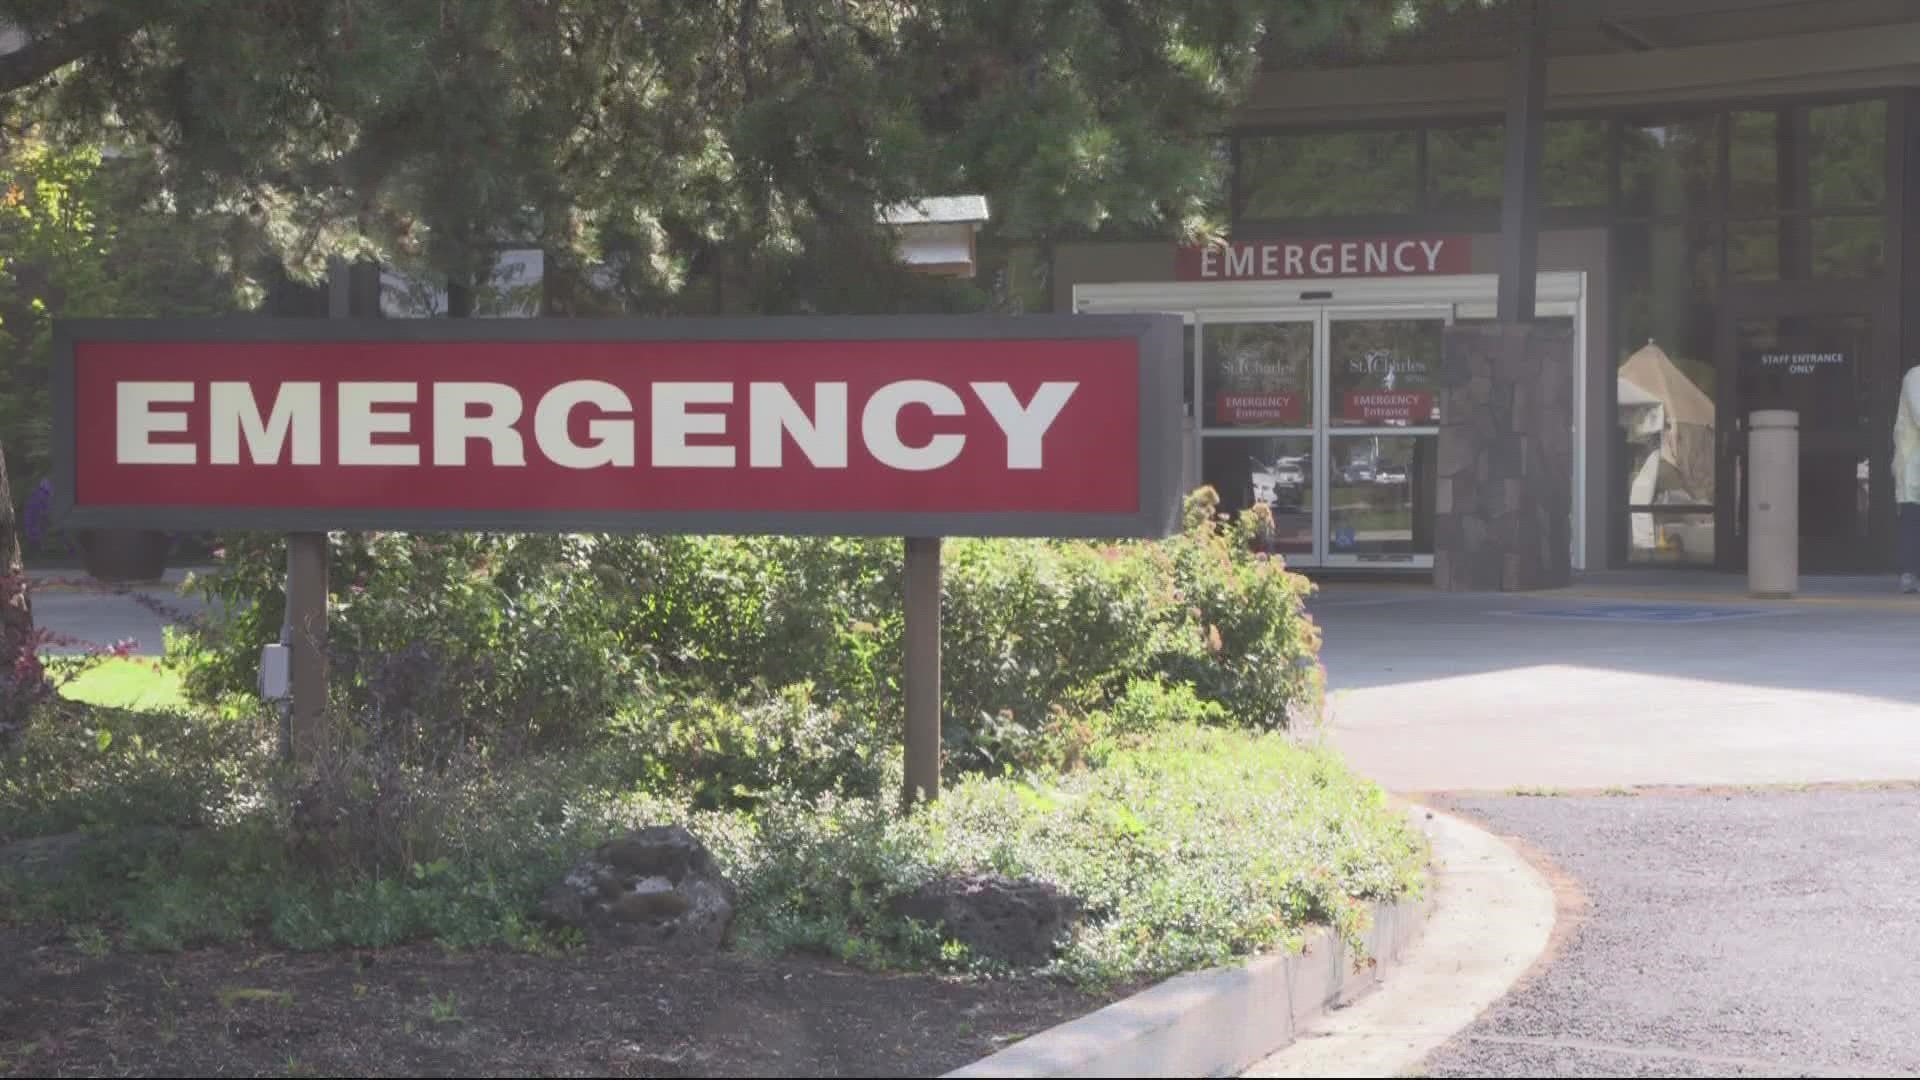 Hospital officials say many factors aside from COVID-19, such as staffing shortages, are straining Pacific Northwest hospitals.